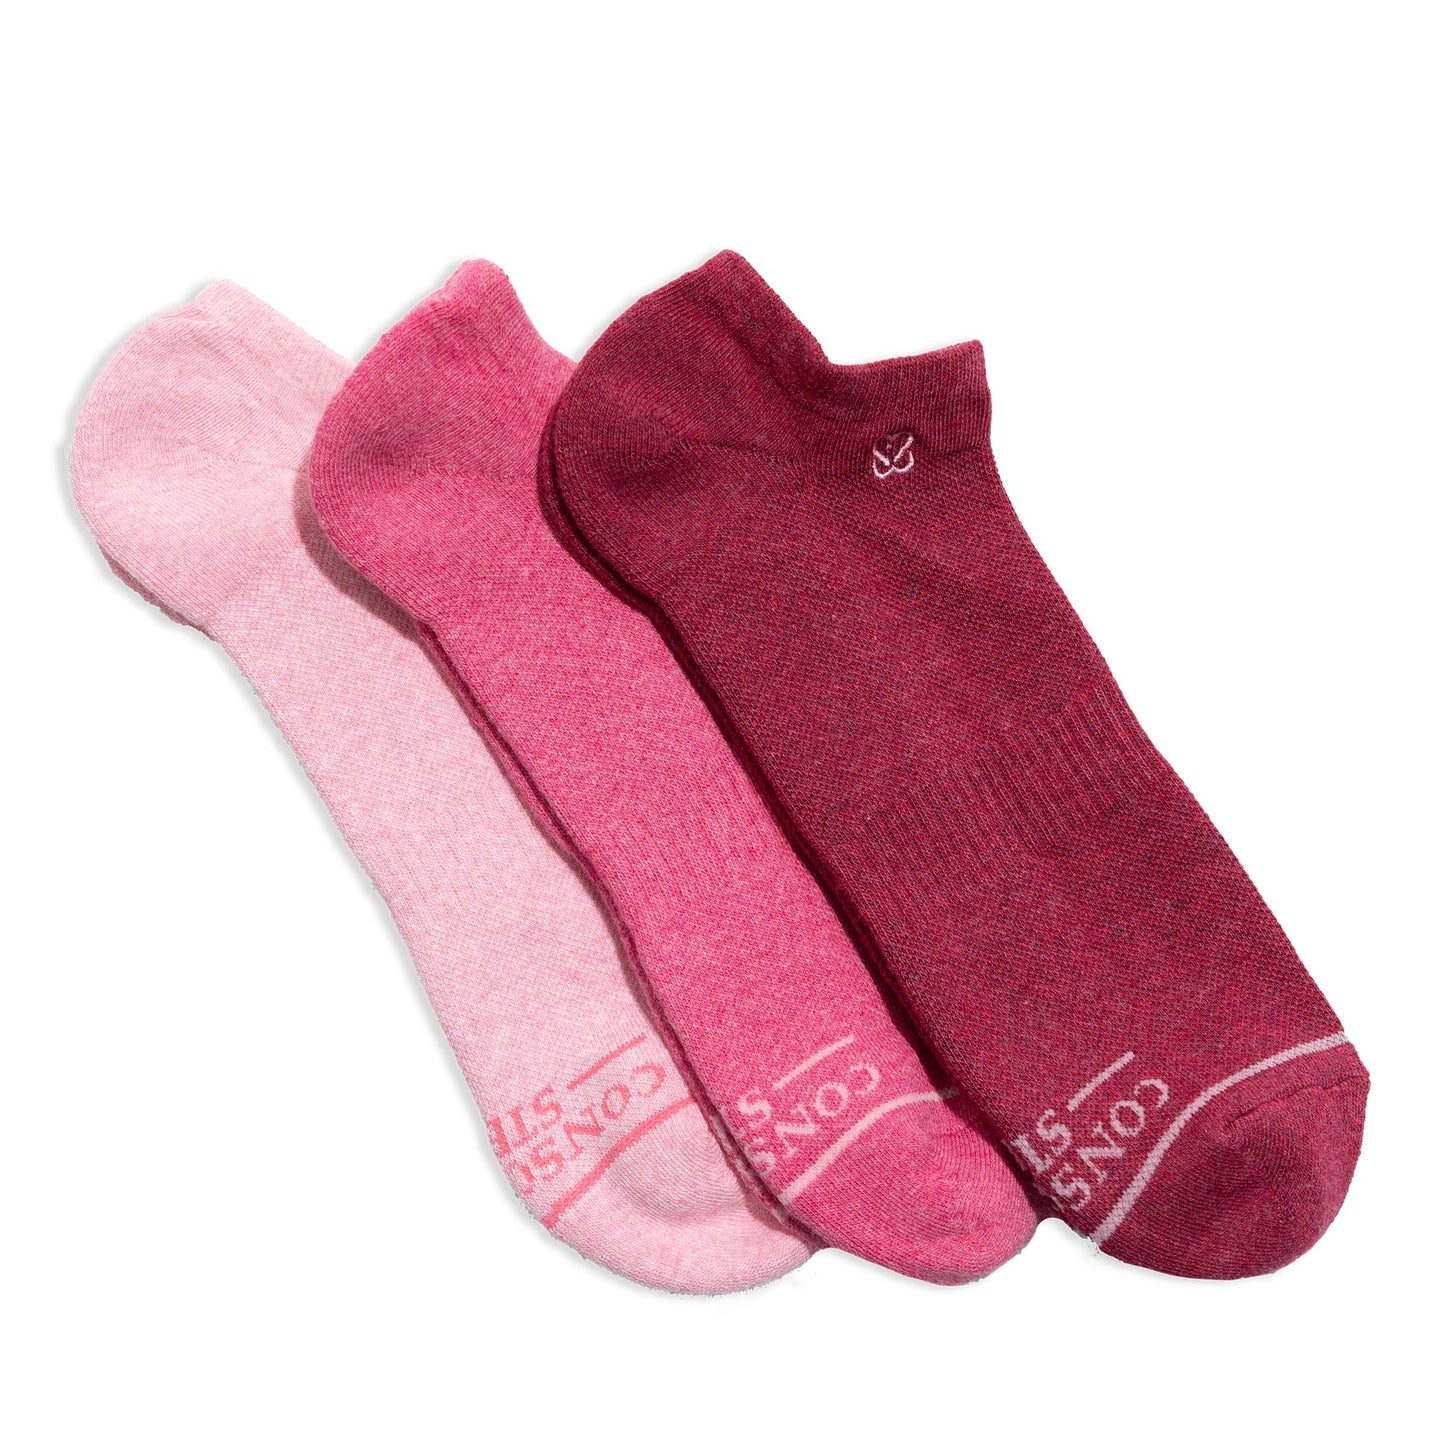 Conscious Step - Gift Box: Socks that promote Breast Cancer Prevention